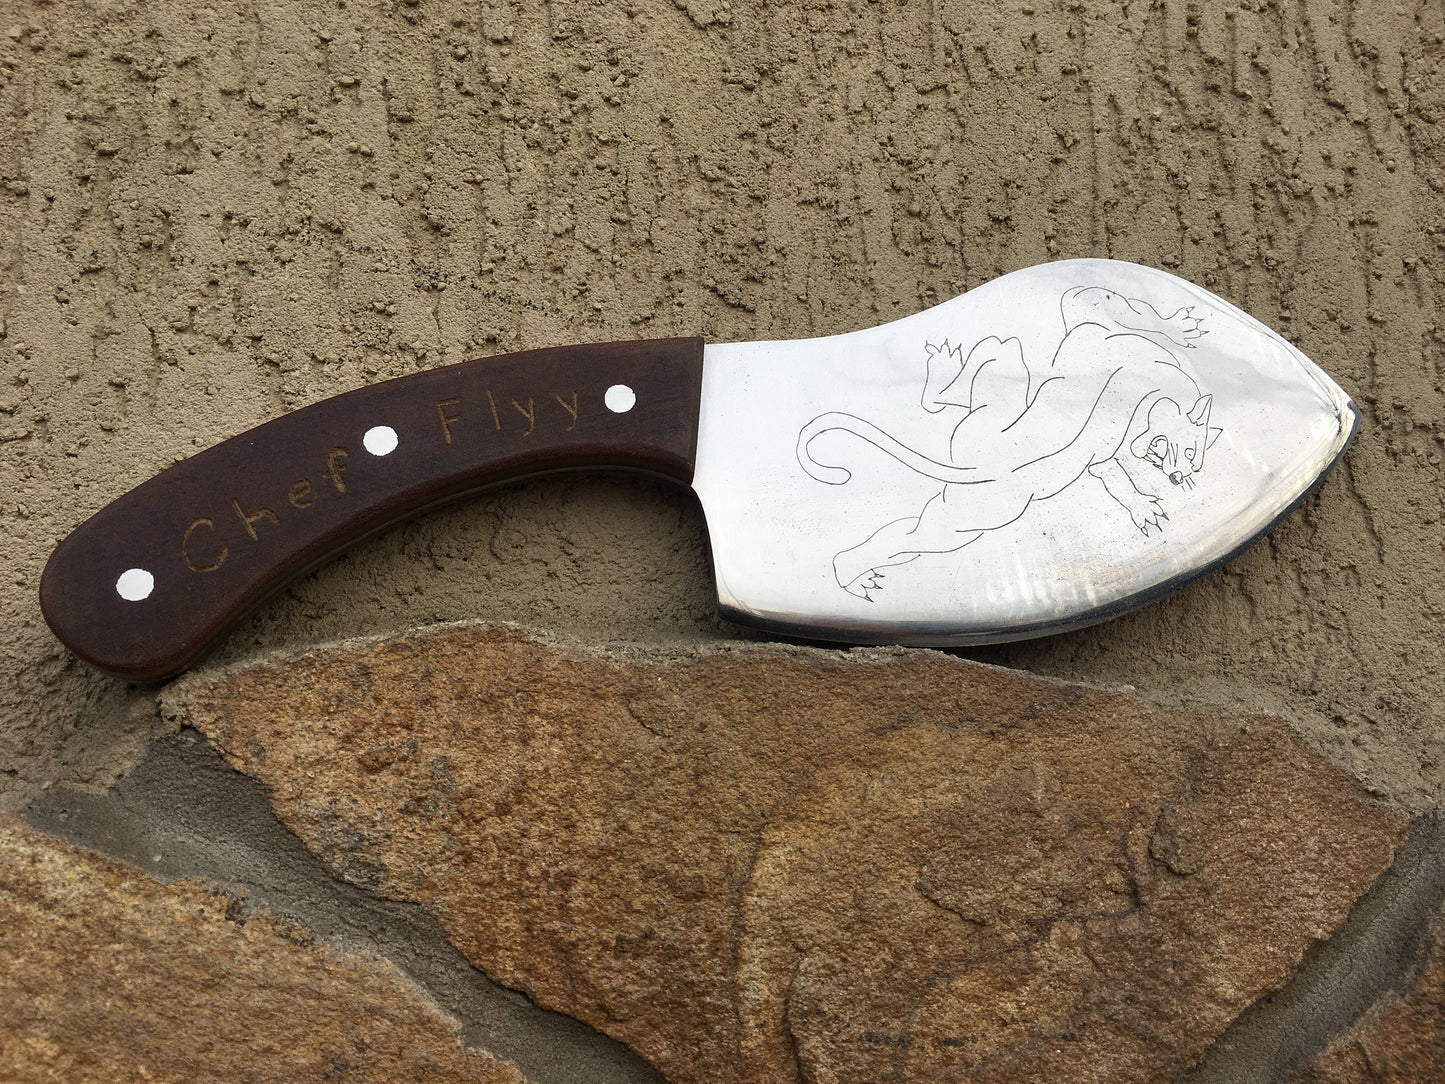 Professional knife, chef knife, hand made knife, kitchen gift, engraved chef knife, gift for chefs, acid etched, cooking,custom knife,knives